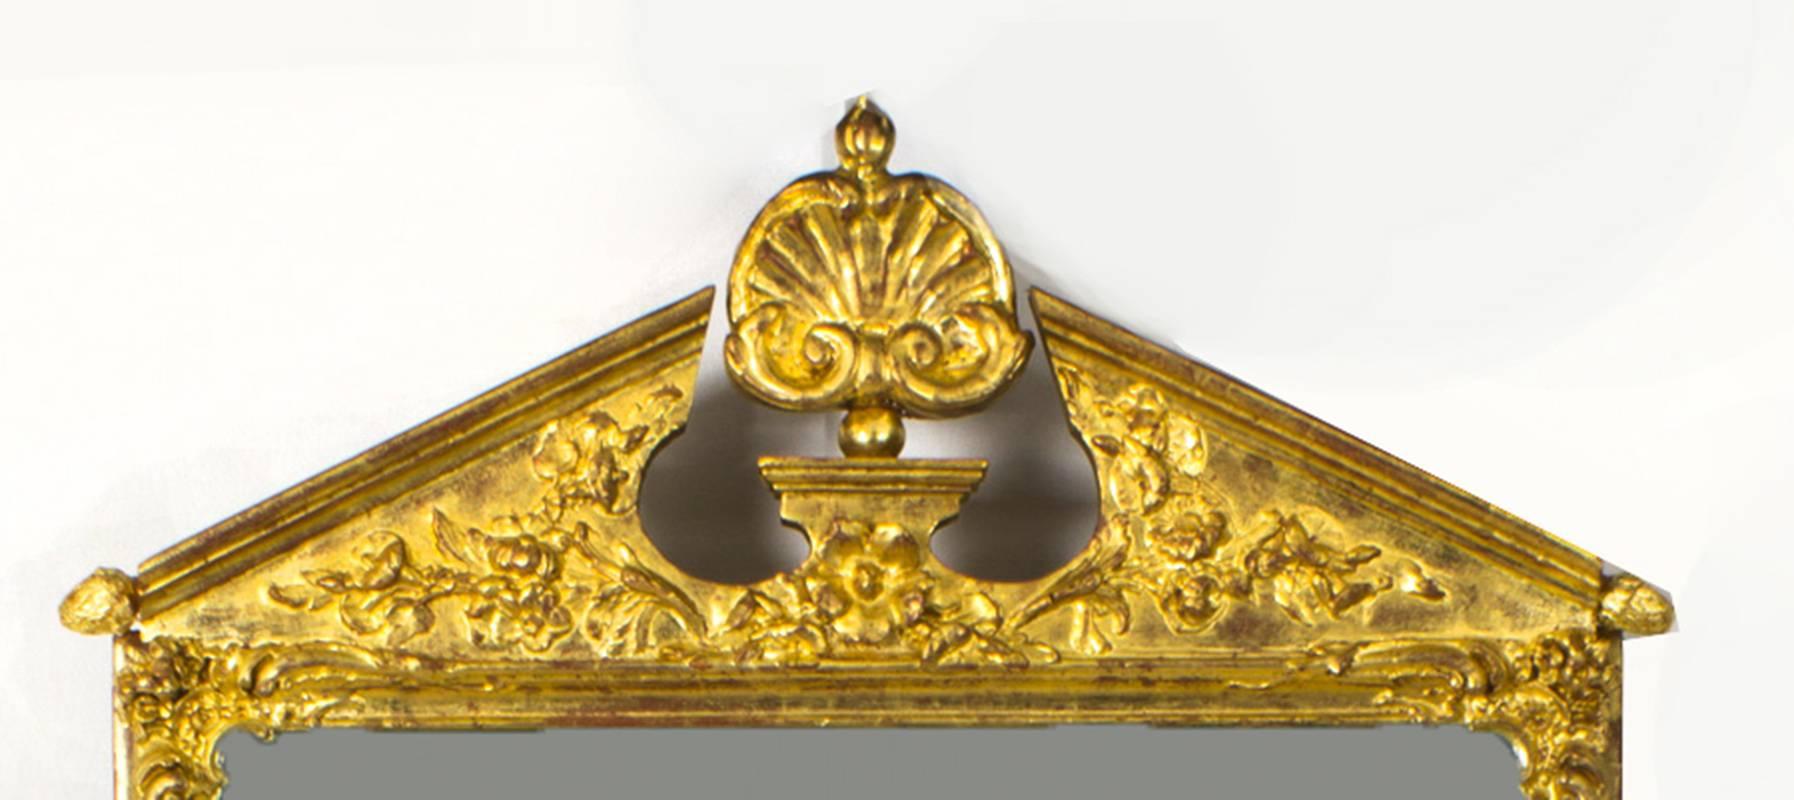 This is a beautiful antique George II style giltwood wall mirror, circa 1870 in date. 

The mirror has a beautiful rectangular shaped frame beautifully carved and gilded with a broken arch cresting centred with a shell and decorated with gilt